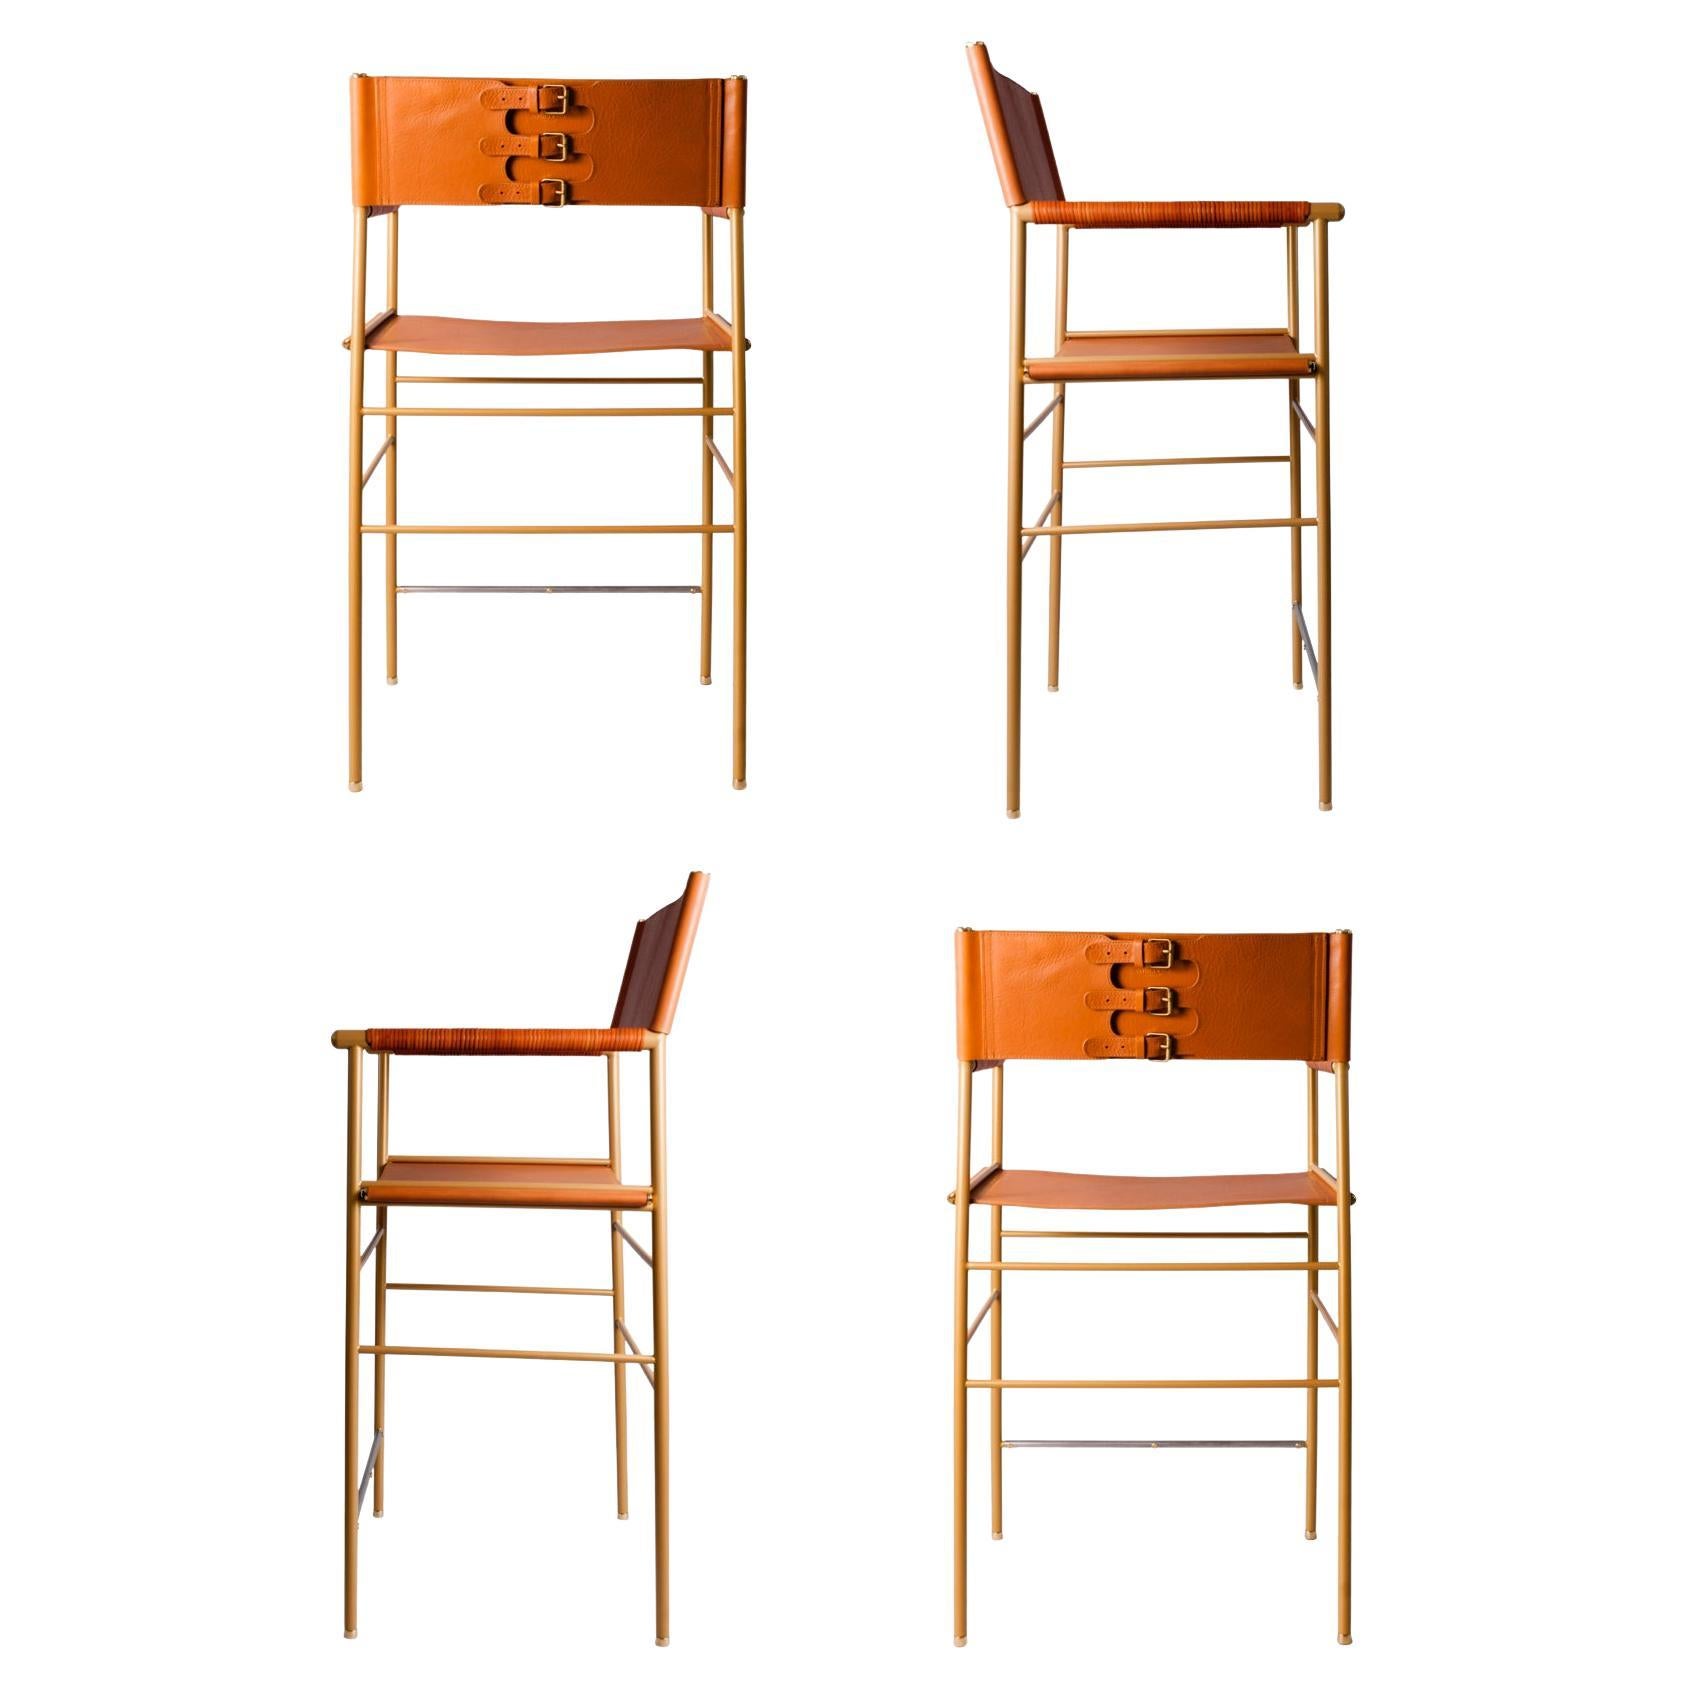 Set of 4 Counter Bar Stools w. Backrest - Tan Leather & Aged Brass Powder Coated